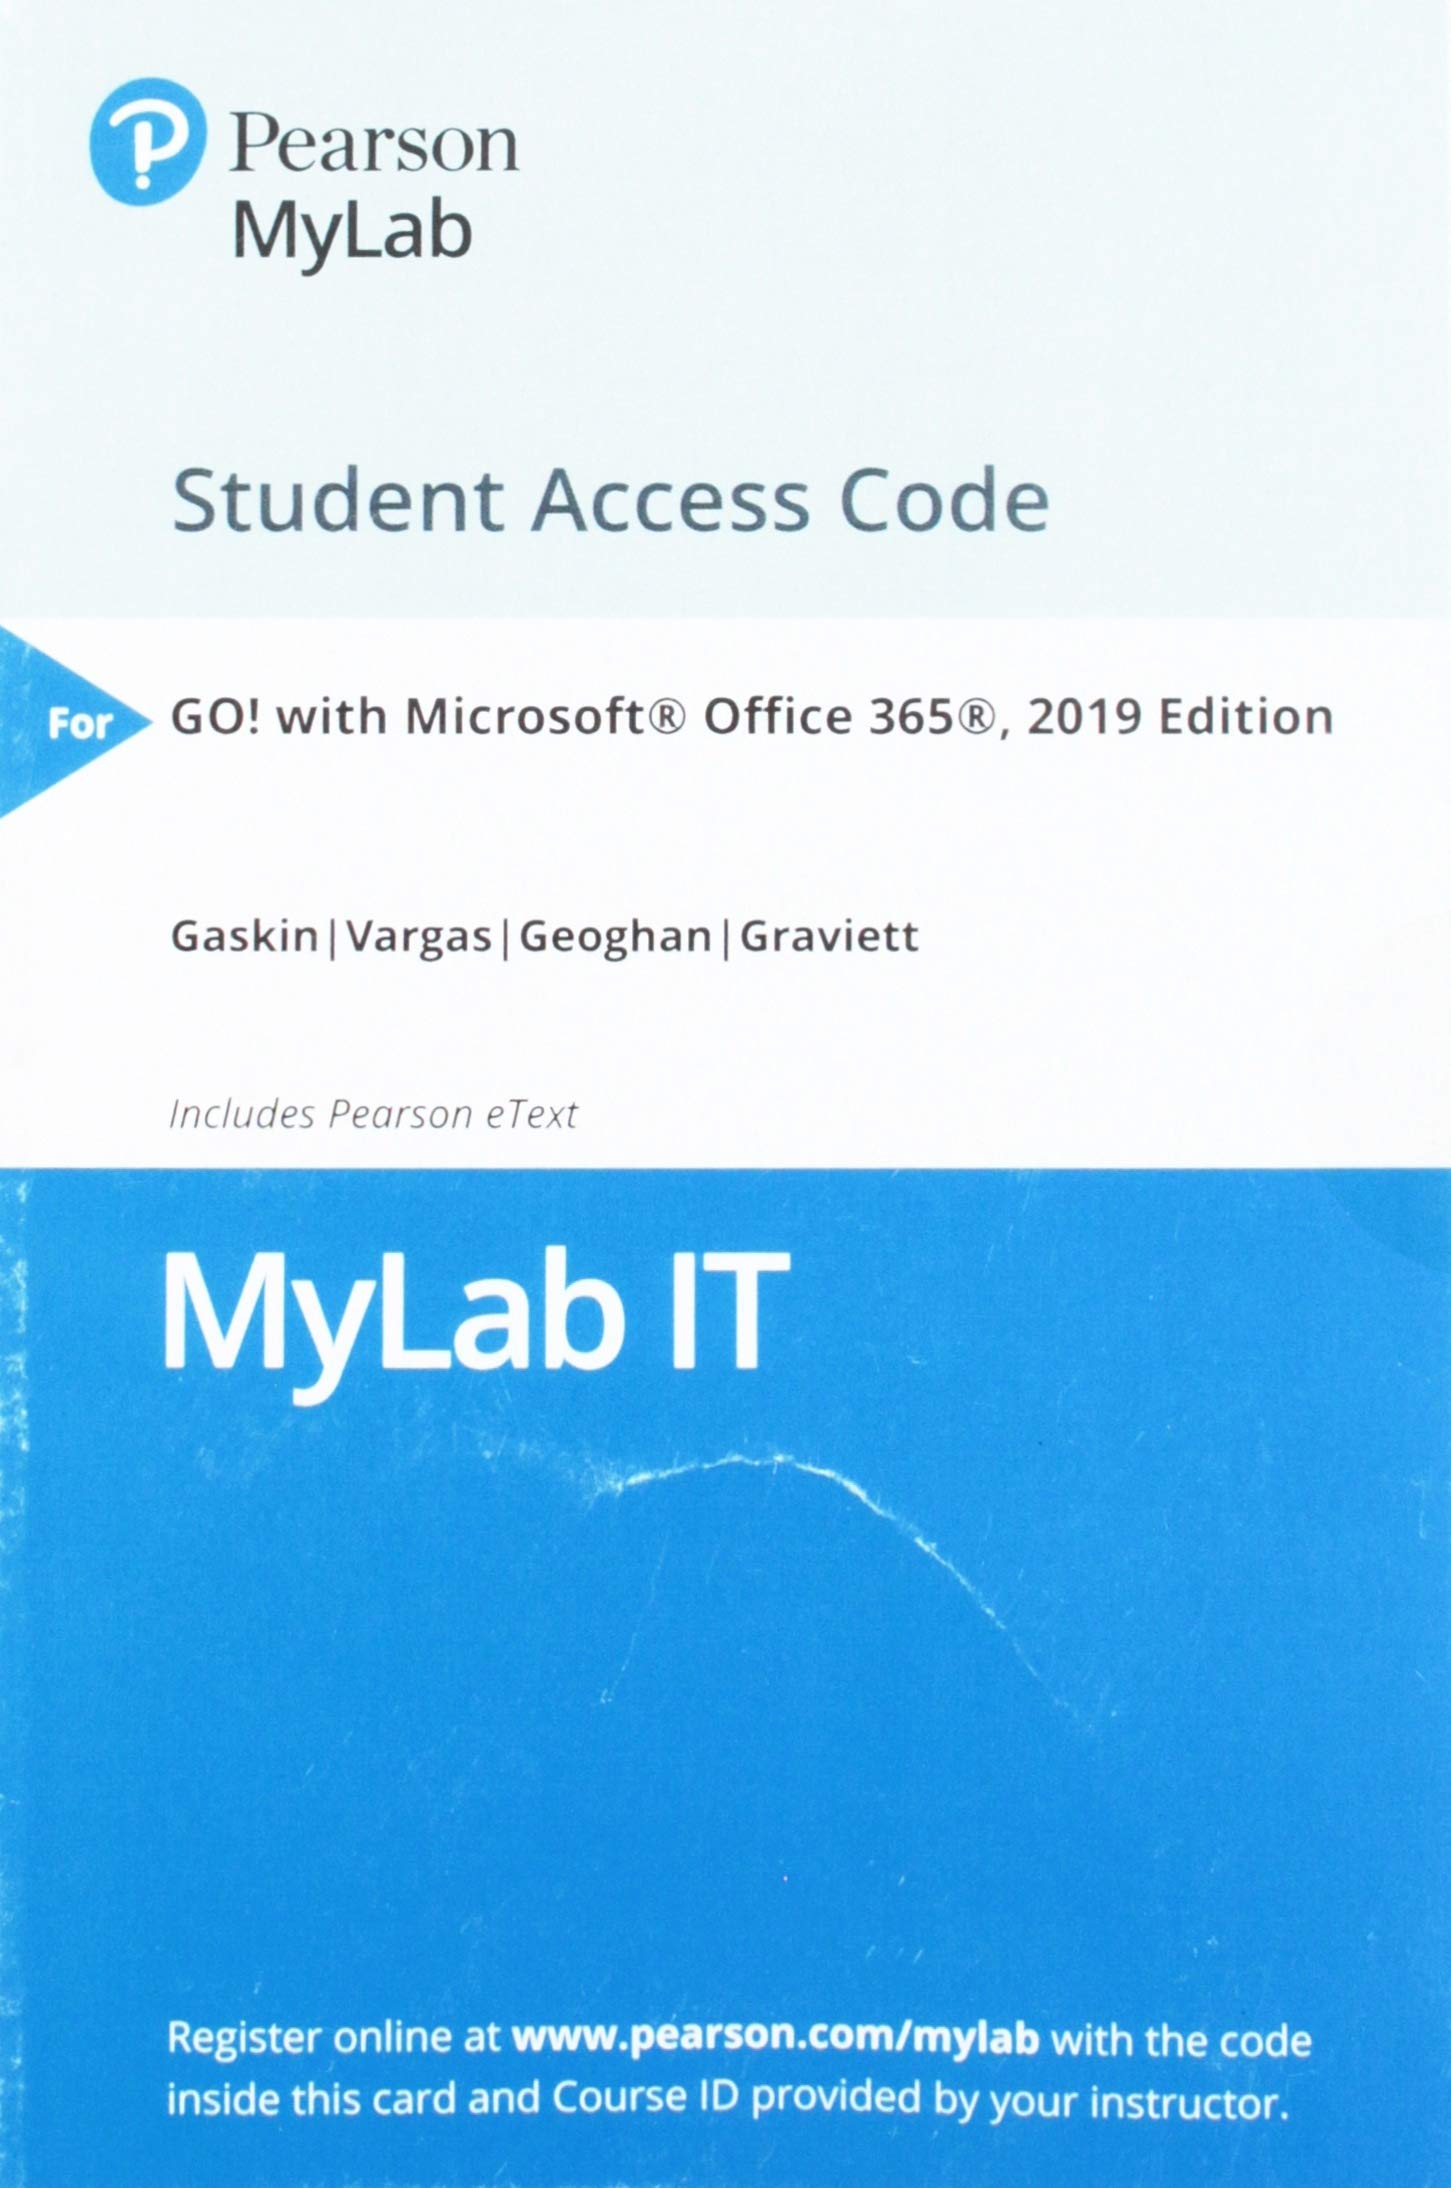 GO! with Microsoft Office 365, 2019 Edition -- MyLab IT with Pearson eText Access Code